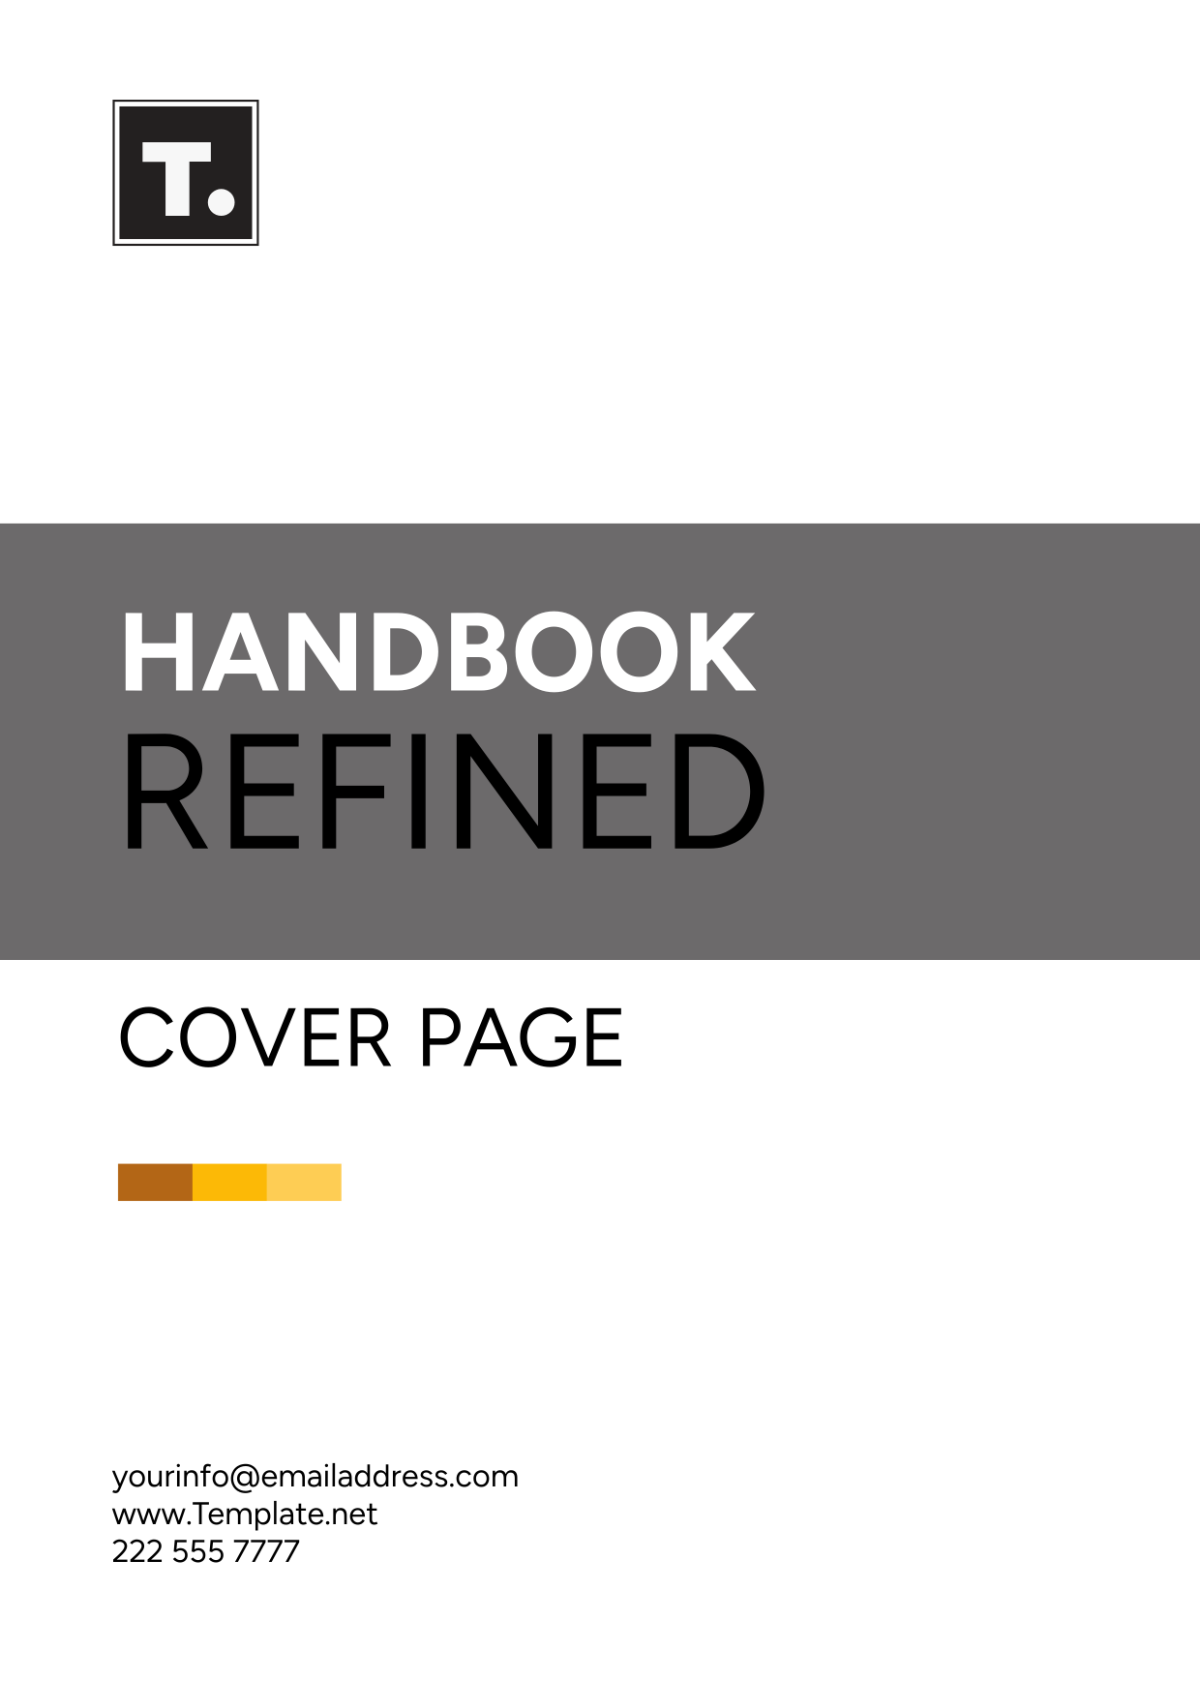 Handbook Refined Cover Page